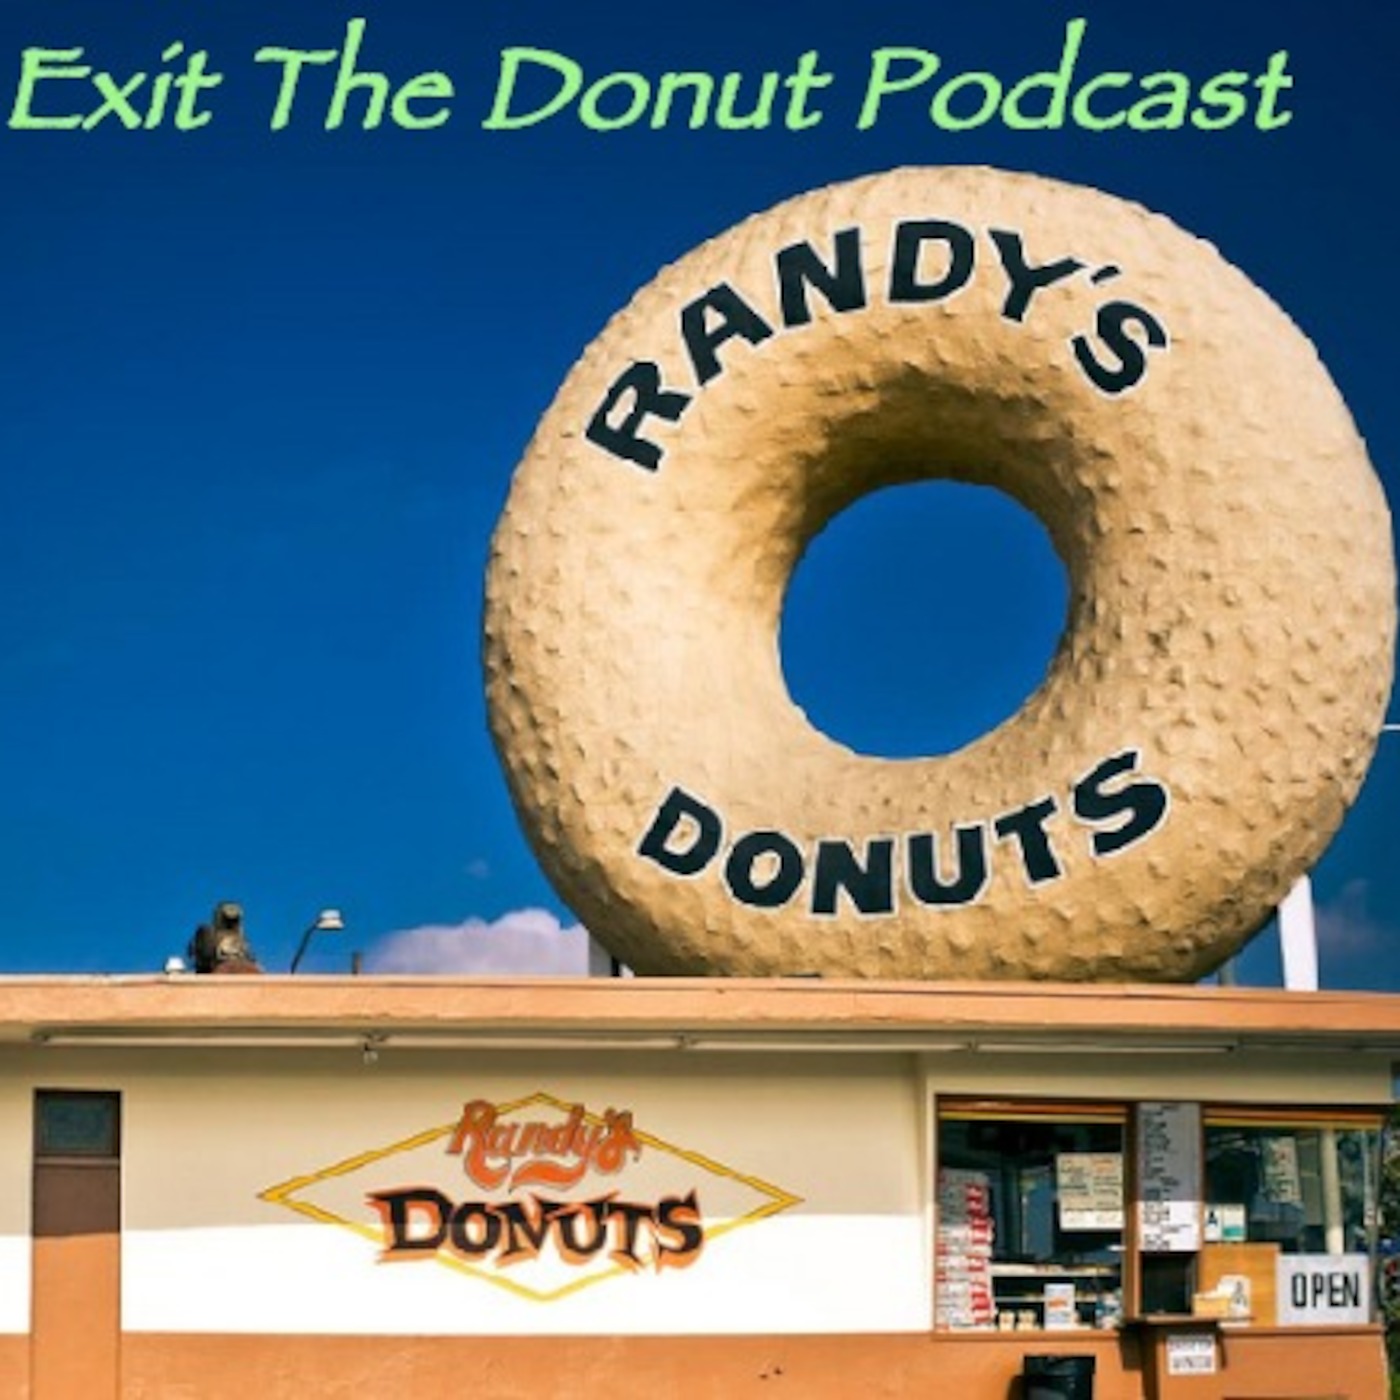 Exit The Donut Podcast Episode 6 - Interstellar, Big Hero 6, and The Hunger Games: Mockingjay Part 1 Review